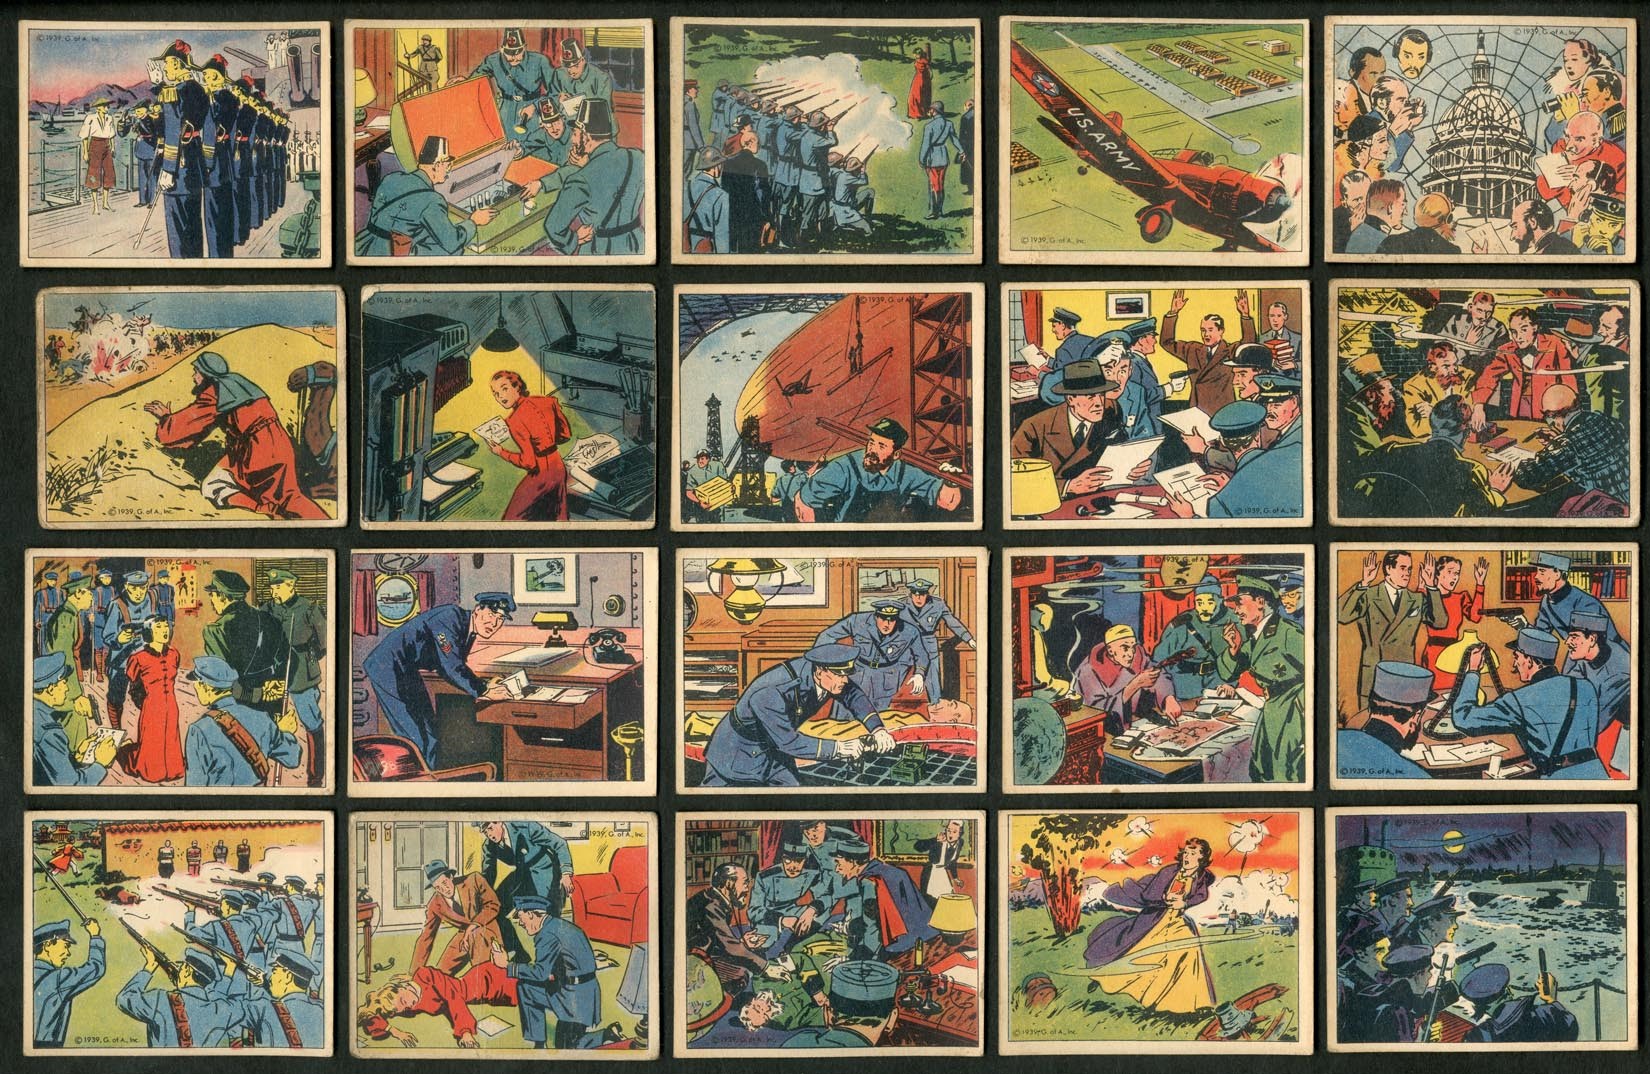 Baseball and Trading Cards - 1939 R156 True Spy Stories Complete Set